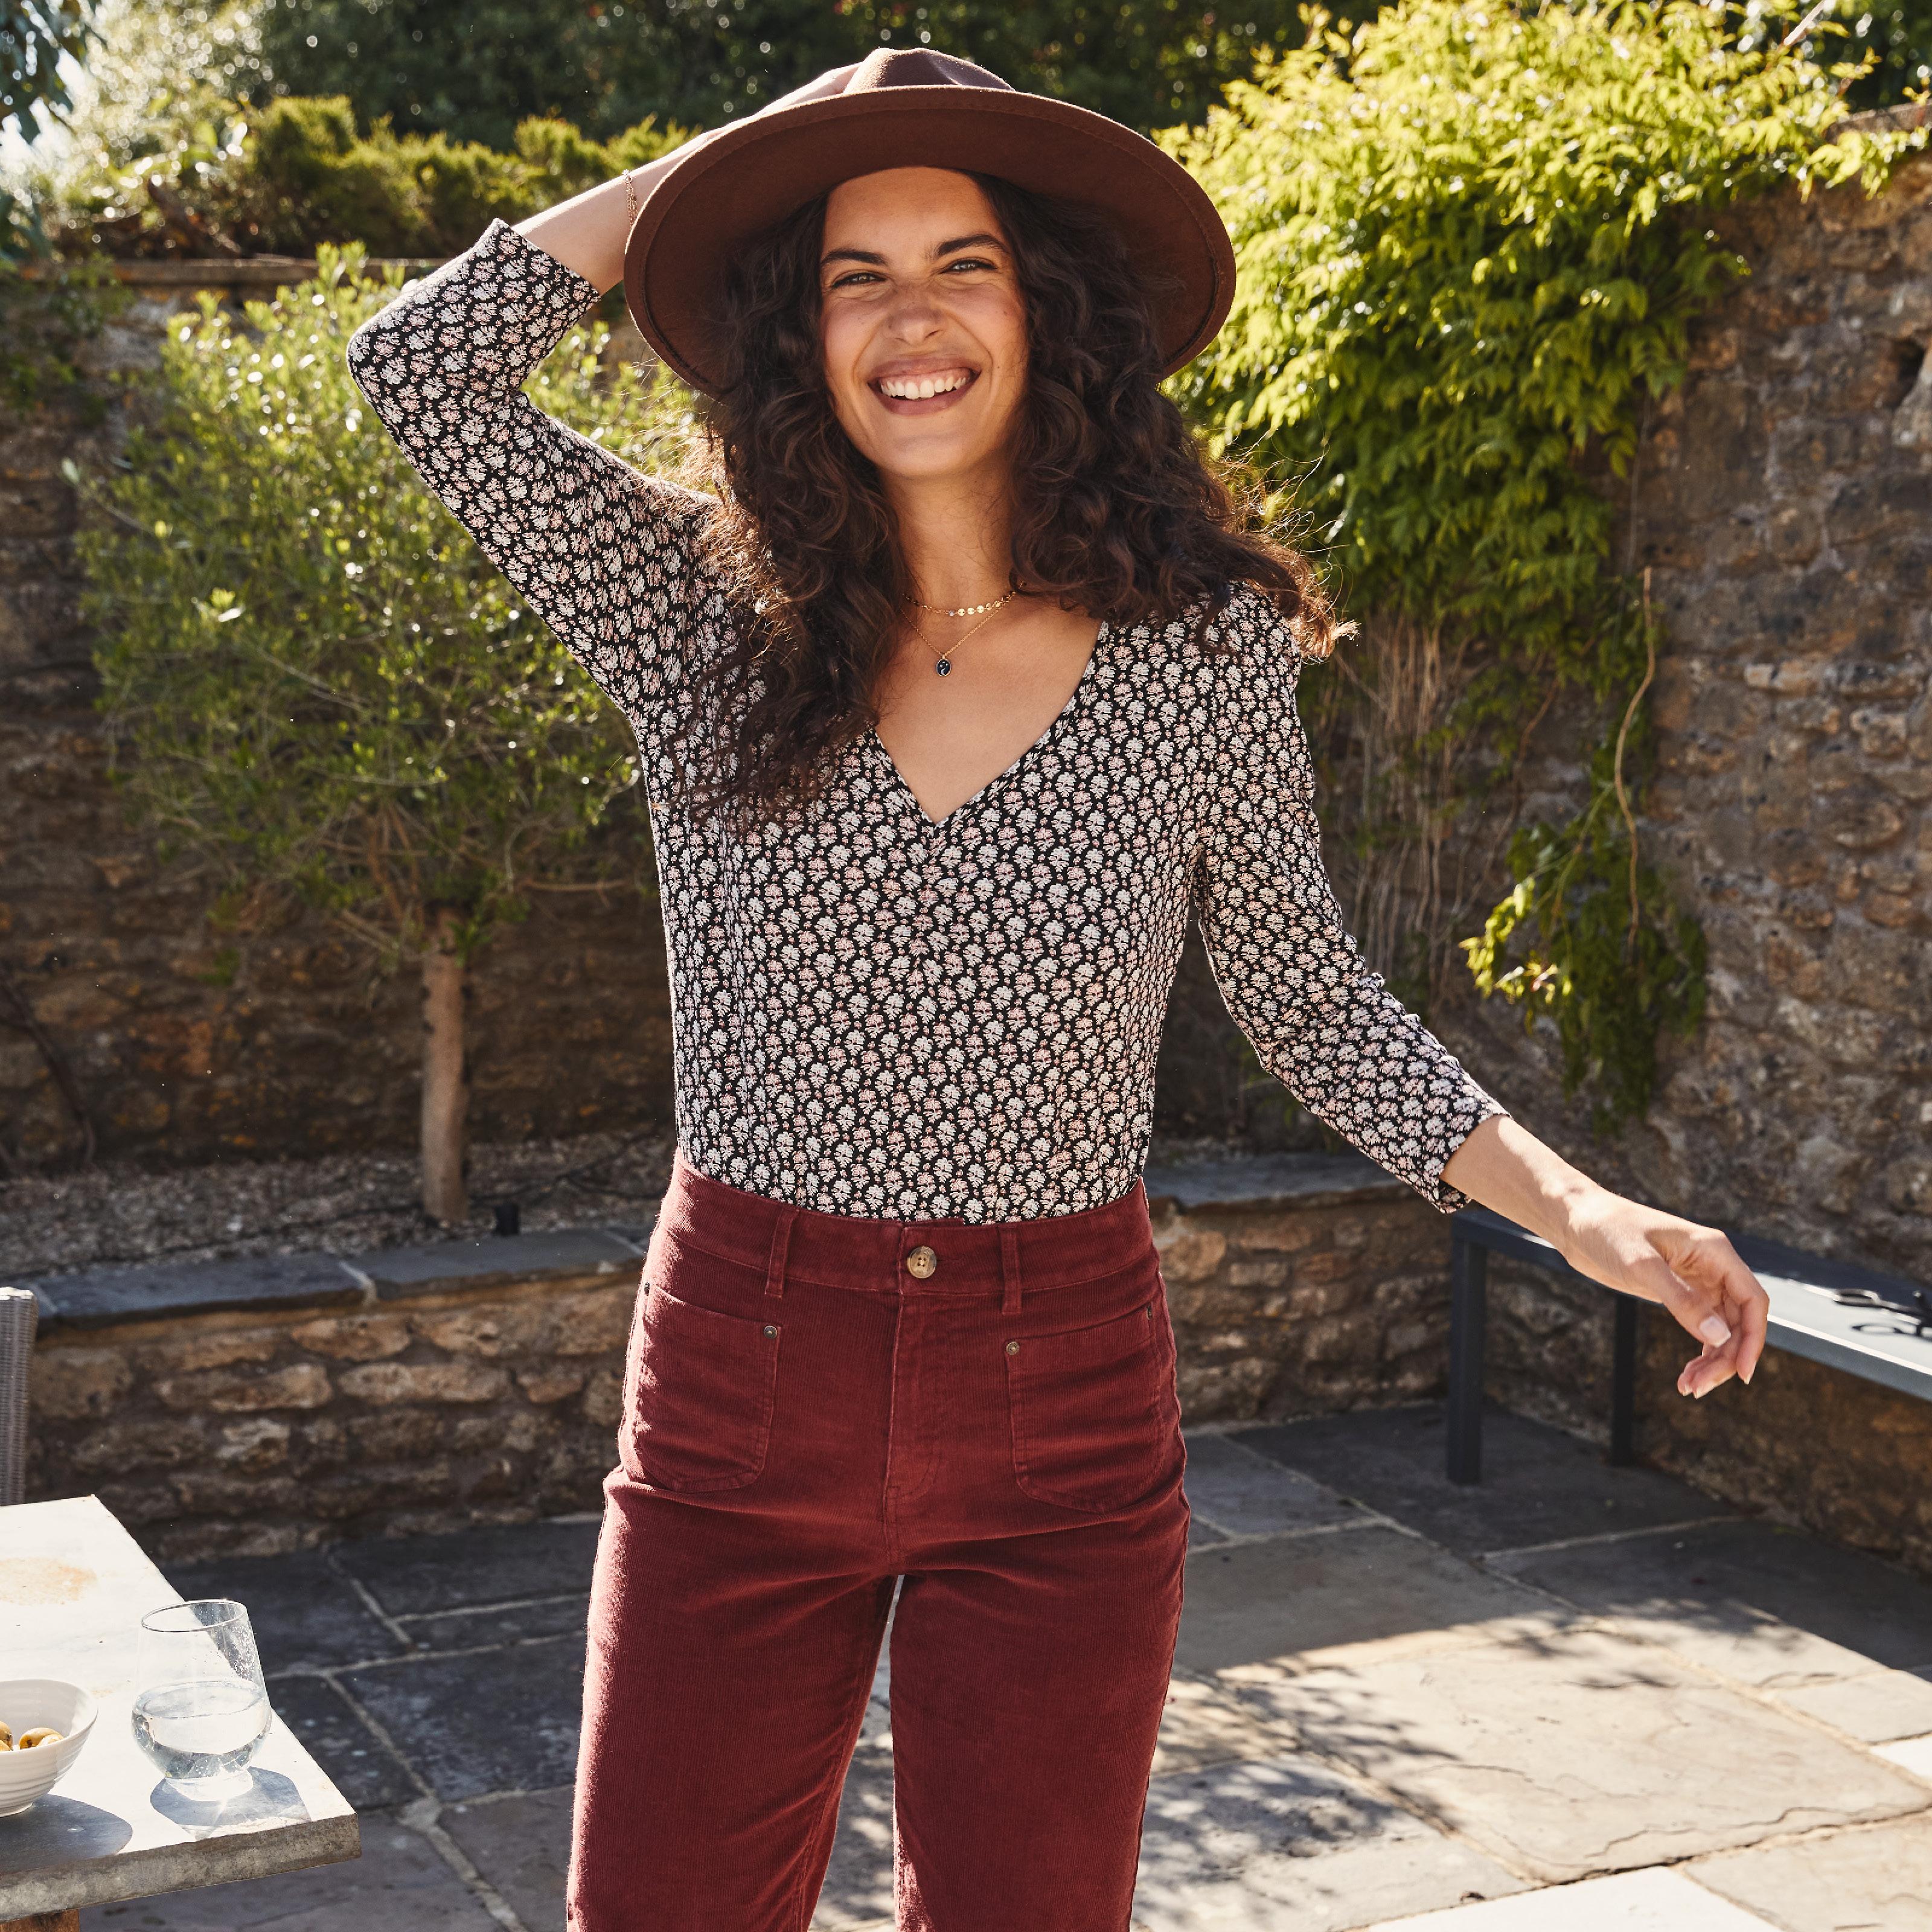 Woman wearing a wide brimmed brown hat, floral tile print top with 3/4 length sleeves, & red cord trousers.